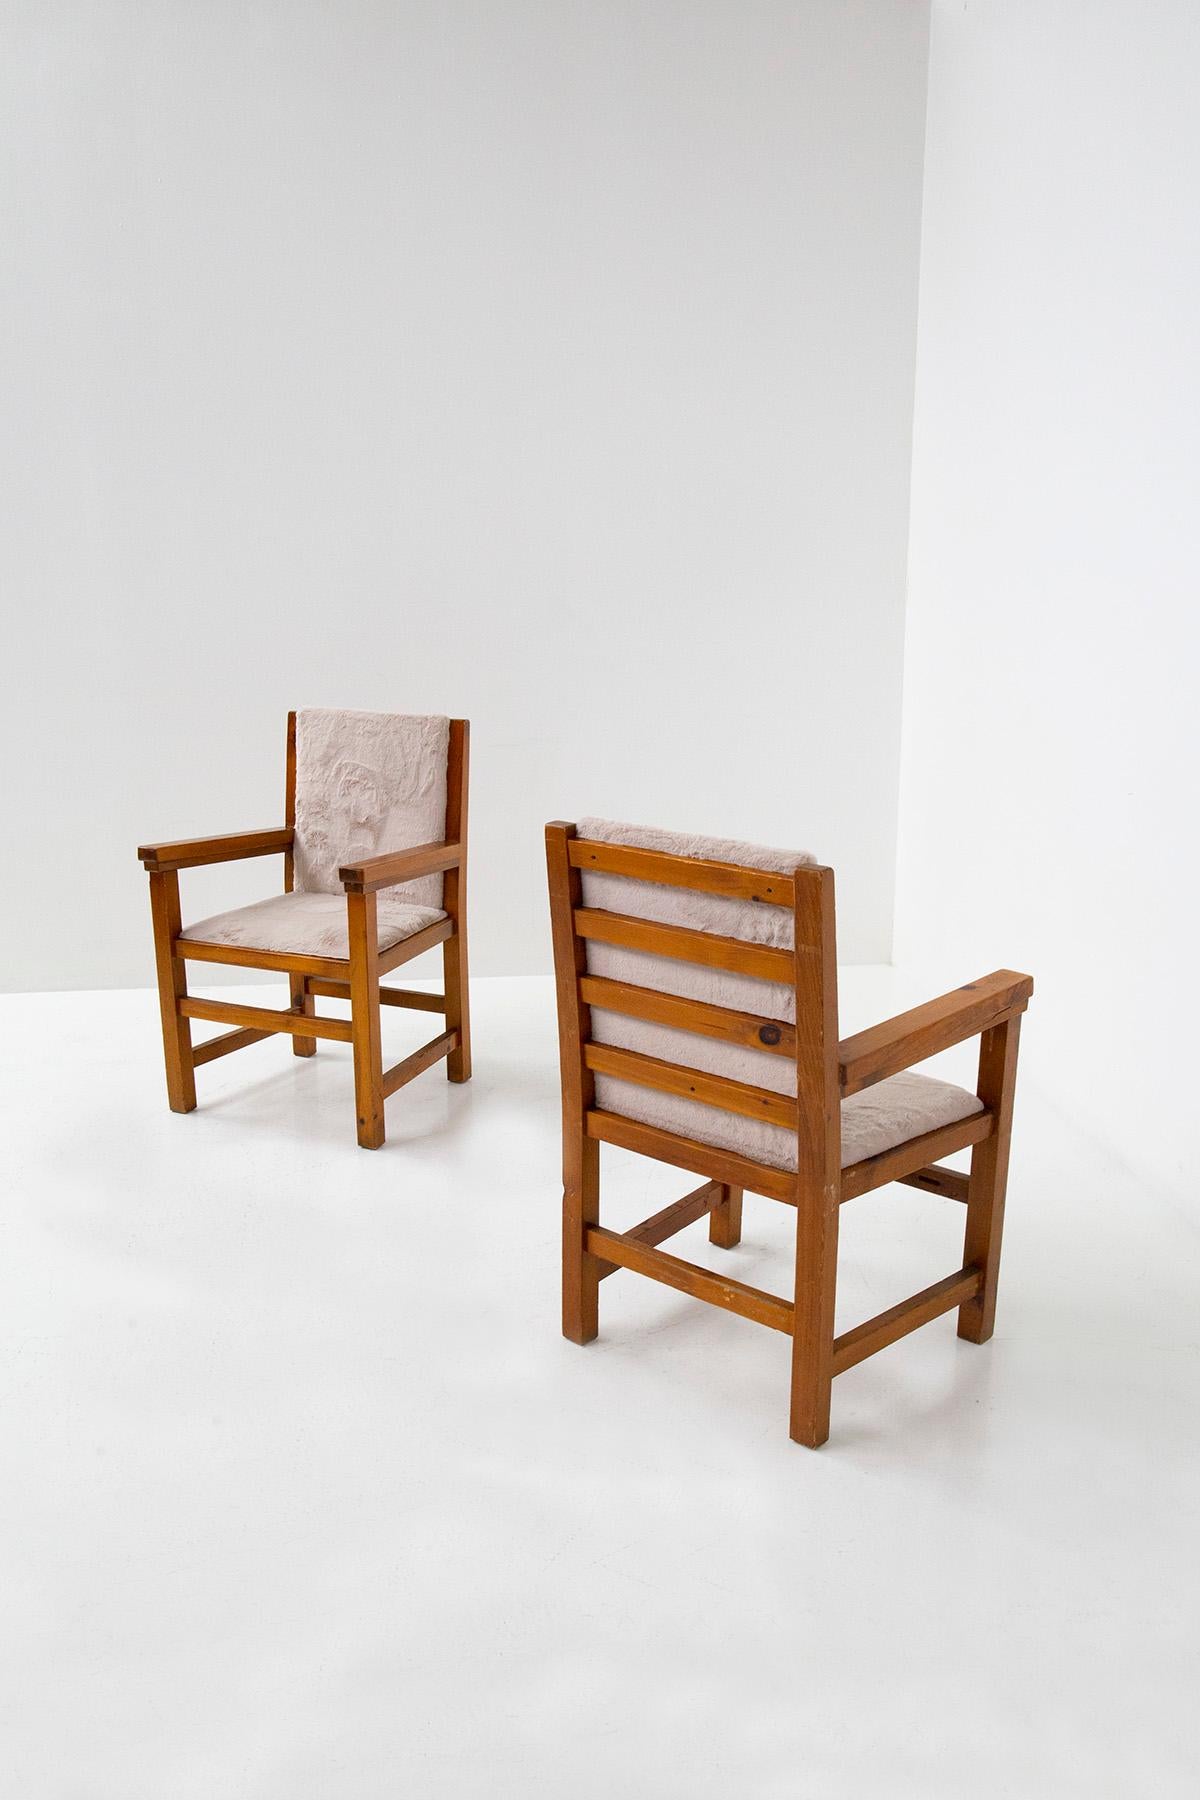 Beautiful pair of Italian armchairs from the 1960s. Collected from a large Italian mountain chalet. The pair of armchairs has a soft and elegant dark pink fur. The frame is made of very solid walnut wood, with shapes typical of mountain